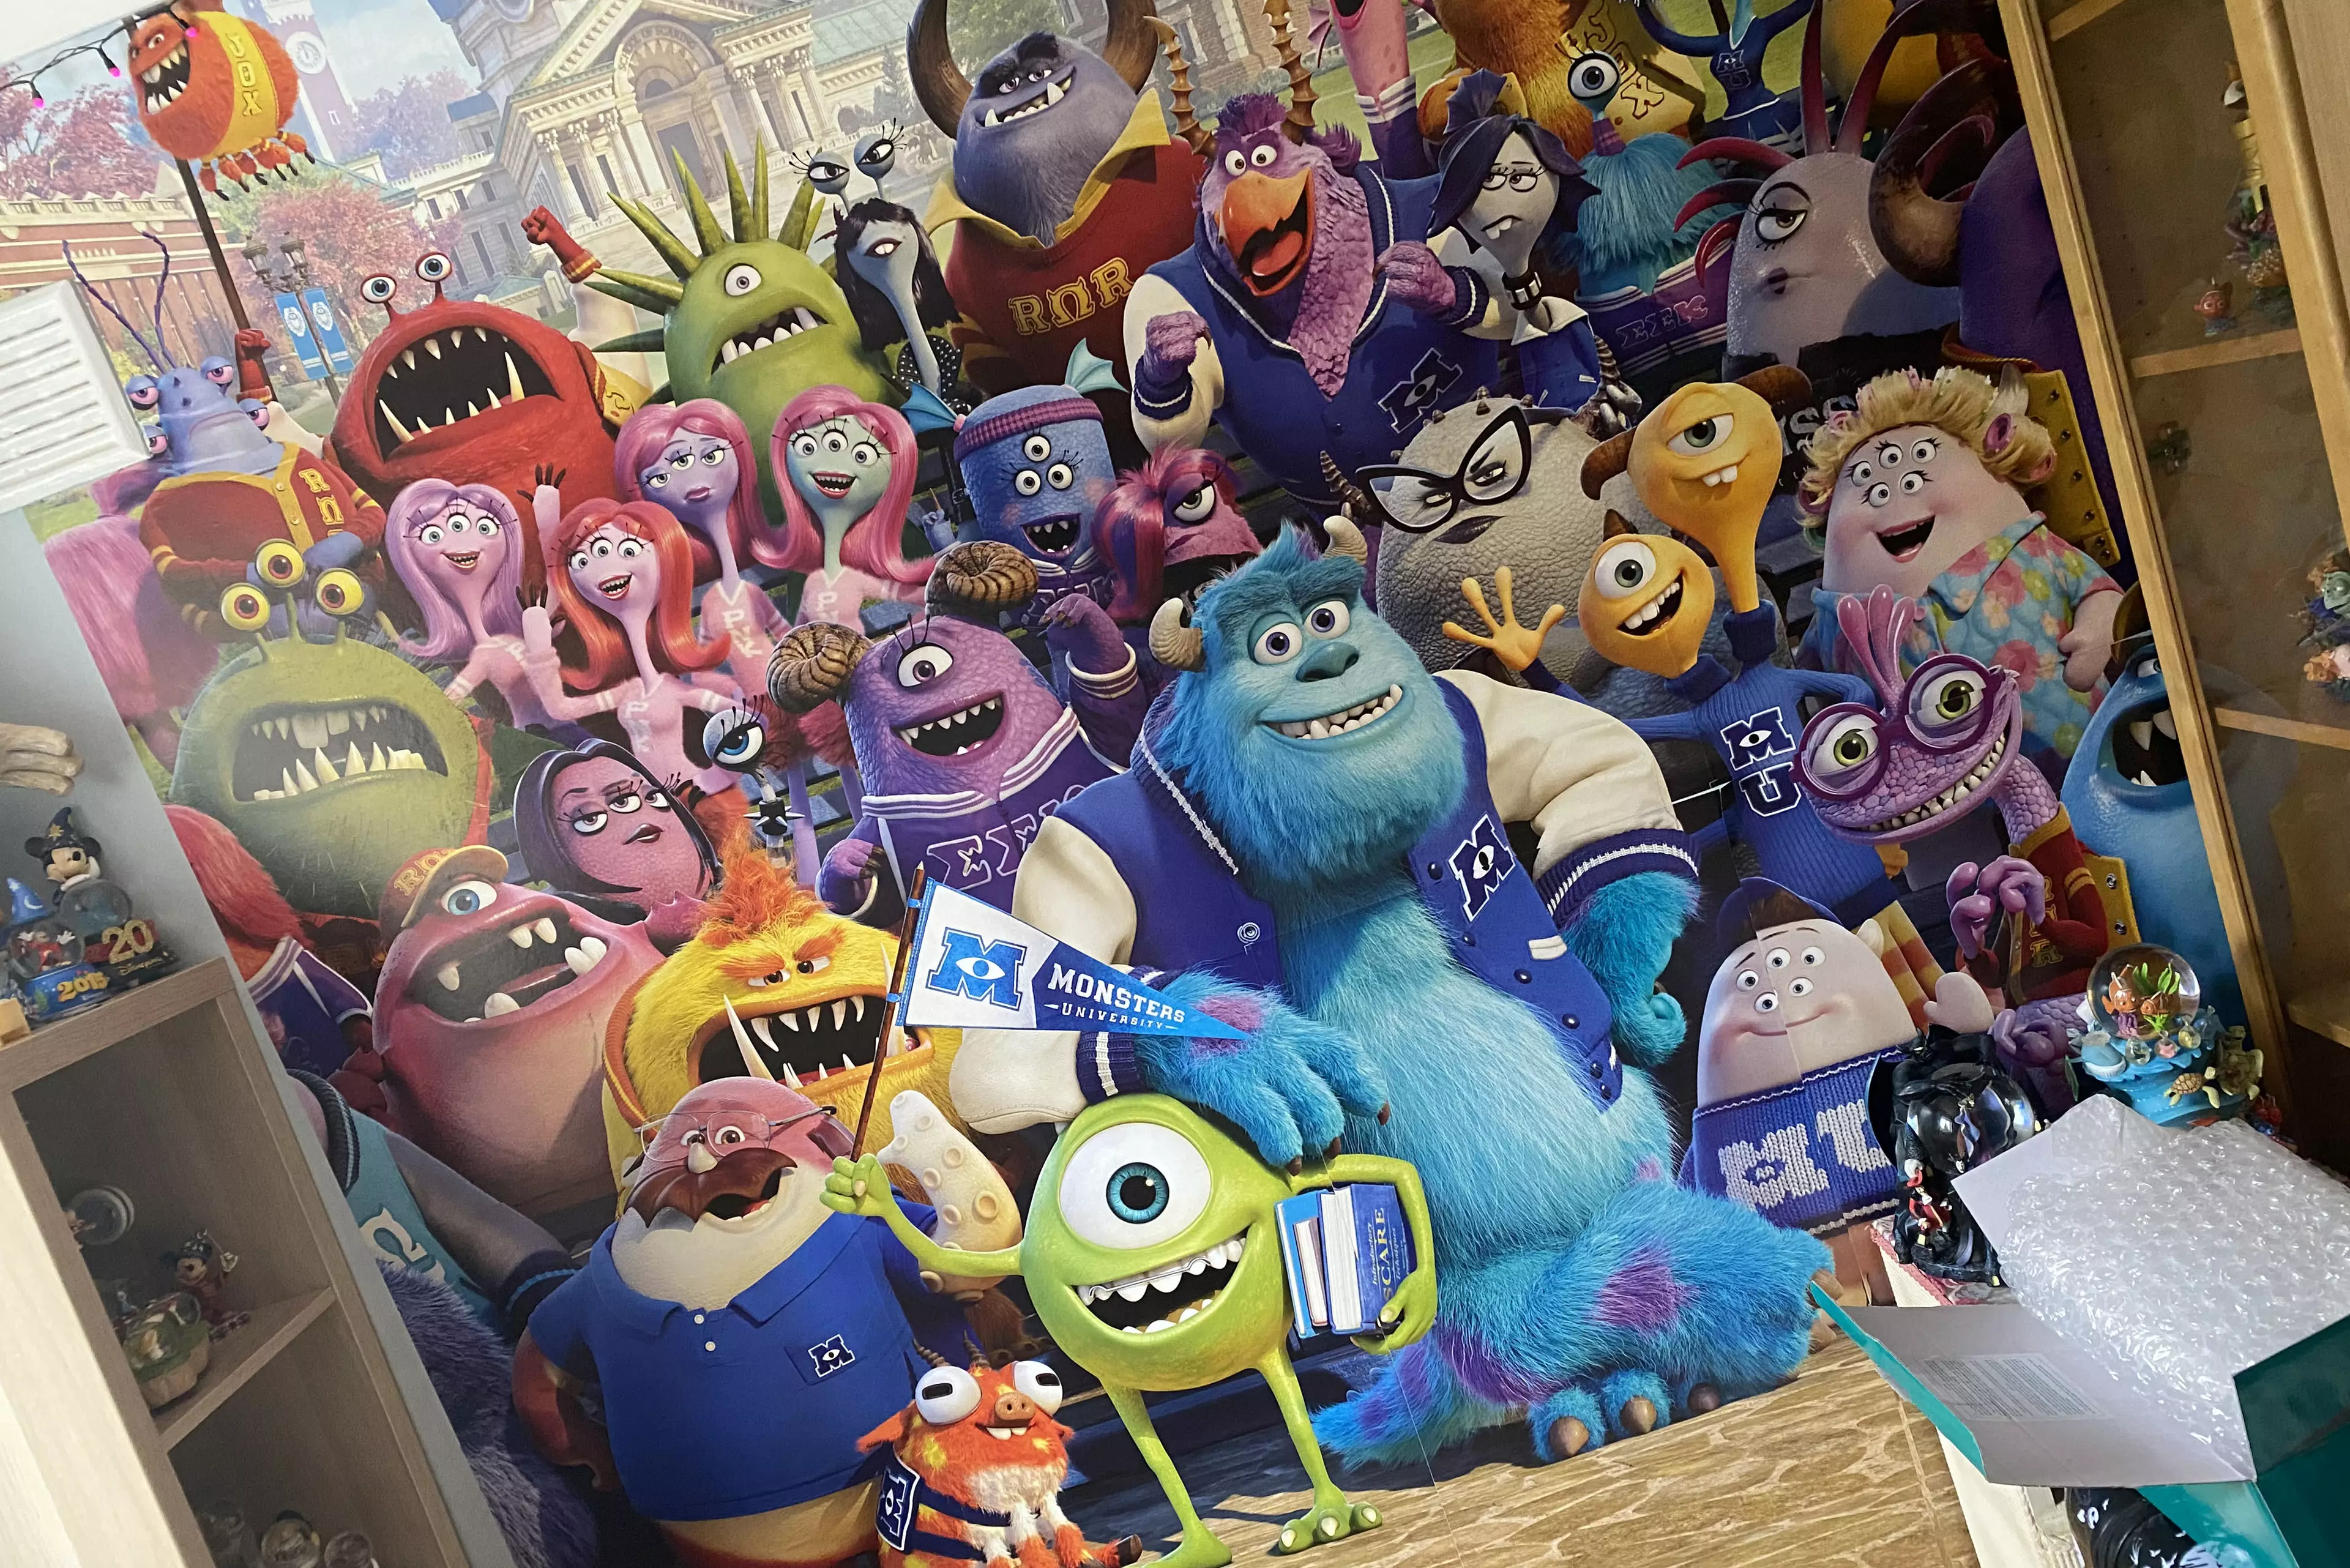 Look at this 'Monsters Inc' wall! (